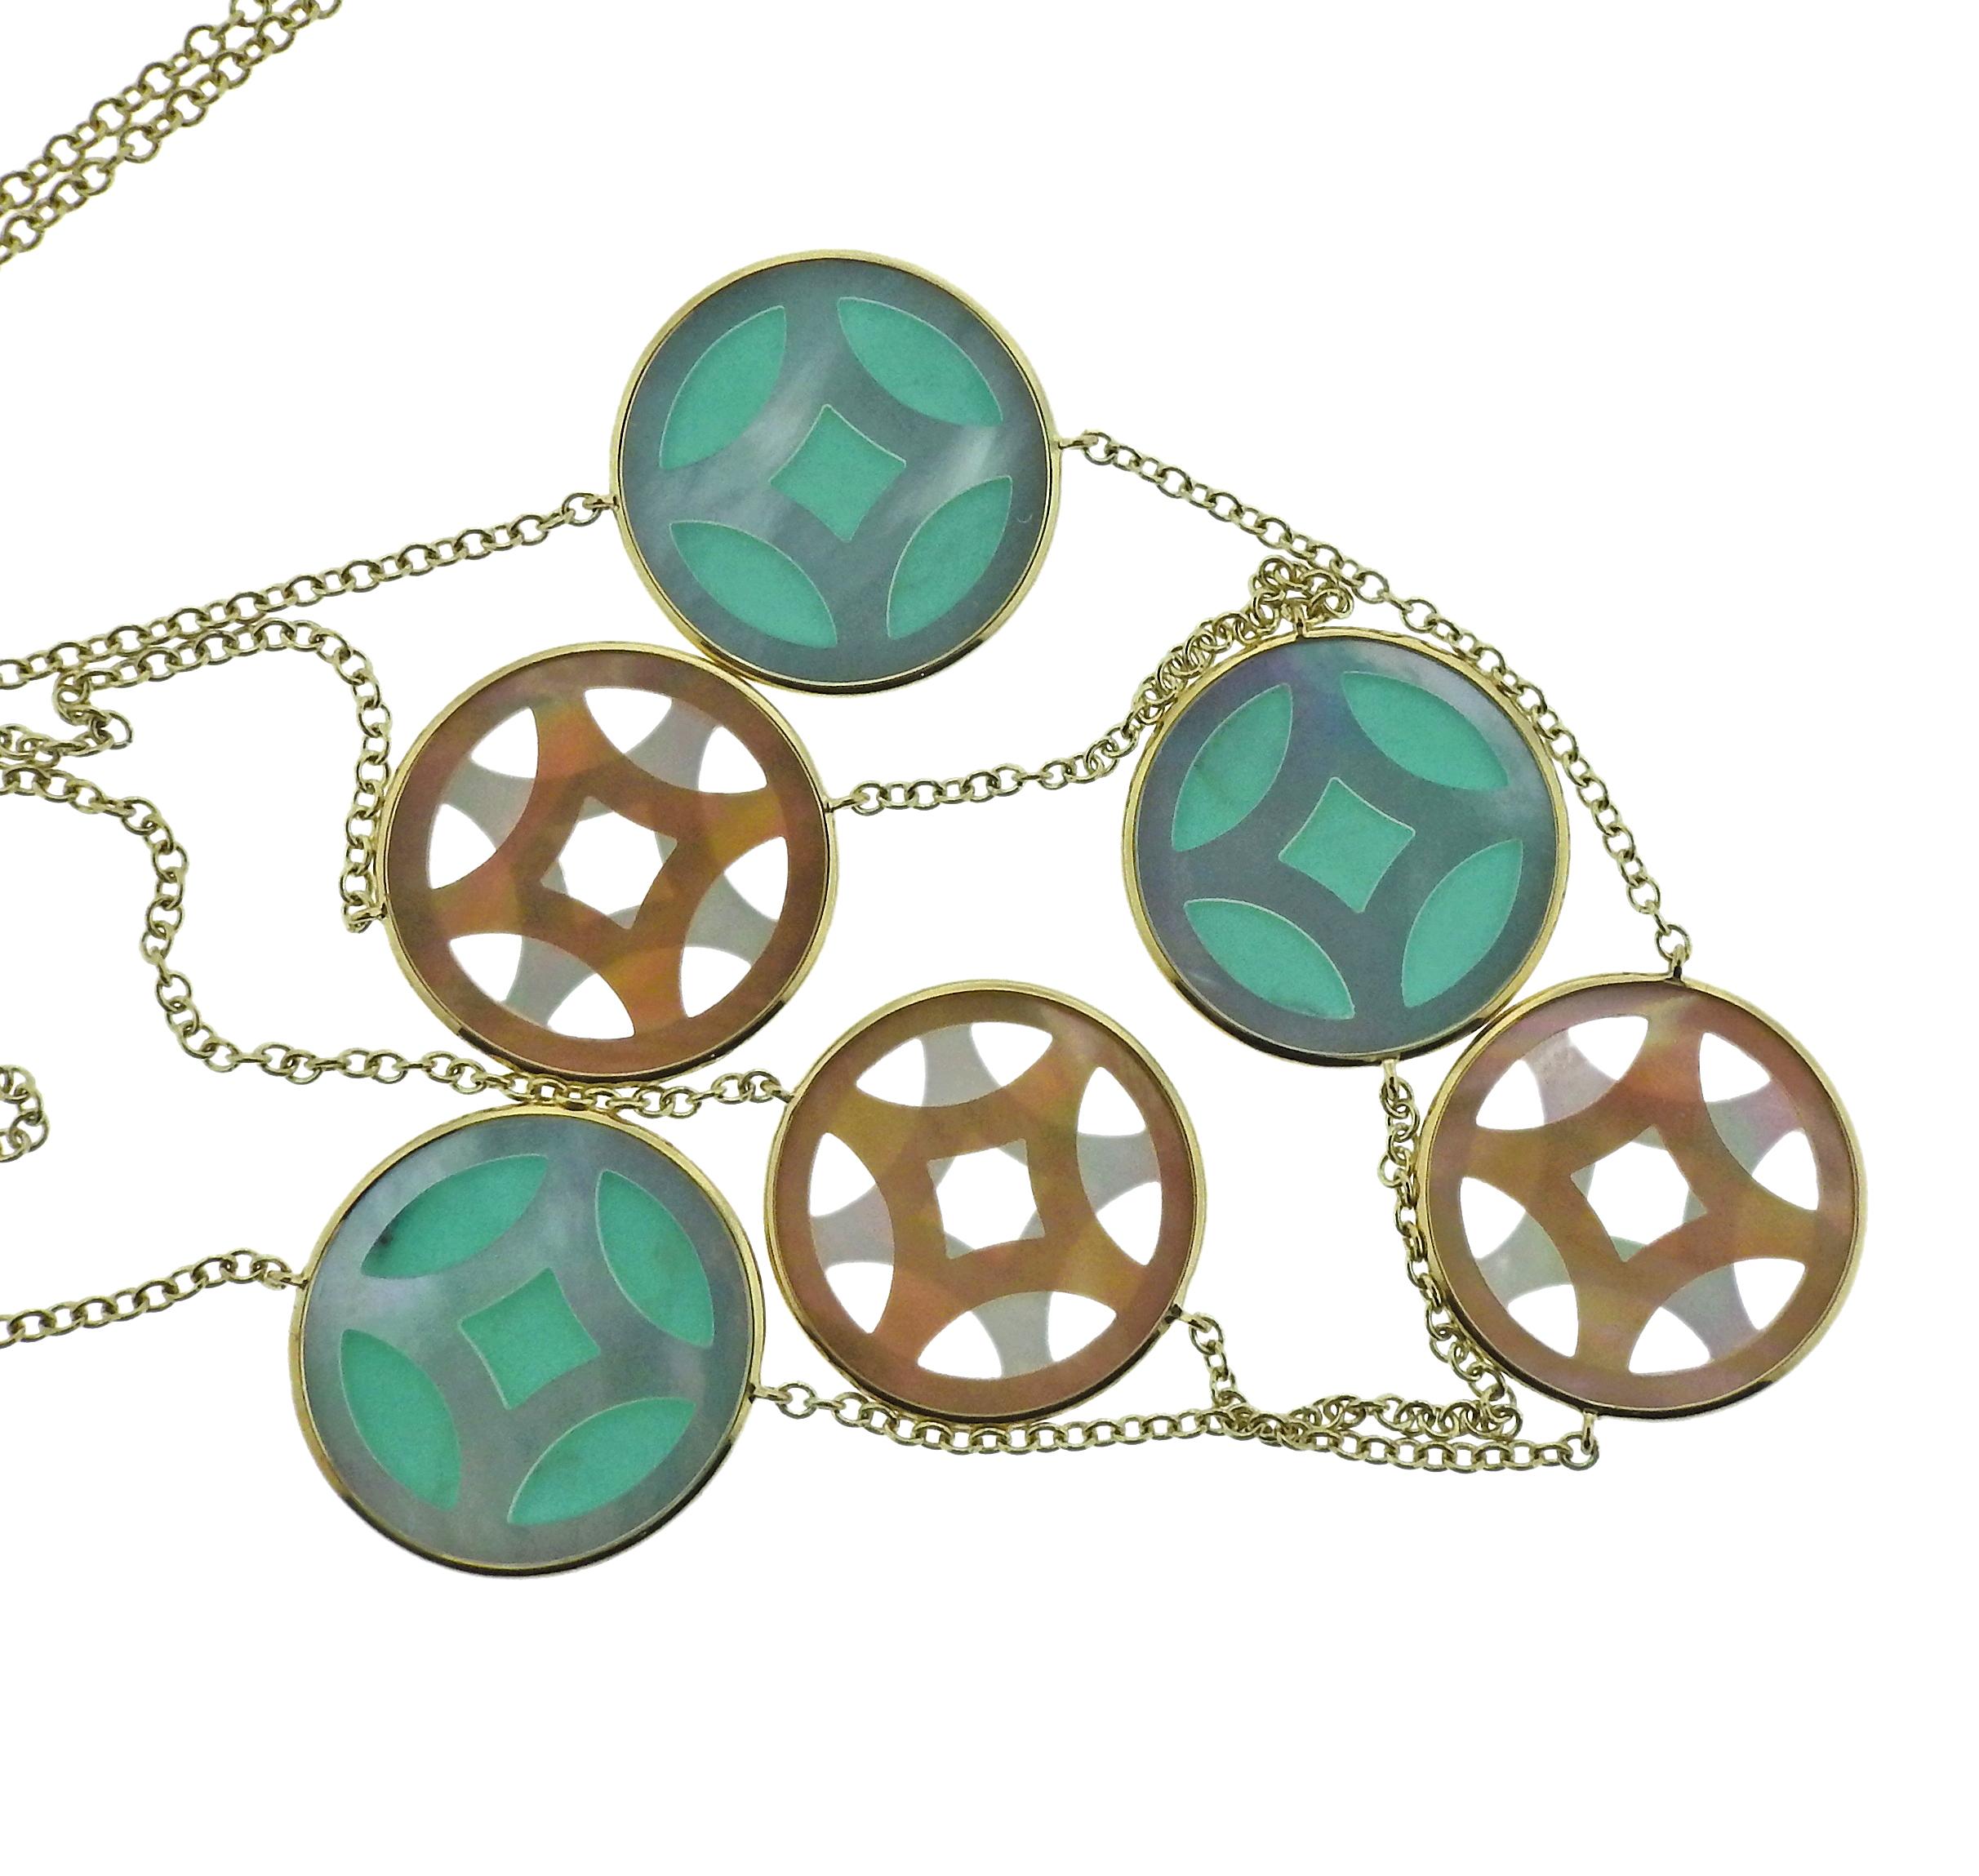 18k gold station necklace by Ippolita, set with shell and turquoise.  Necklace is  37